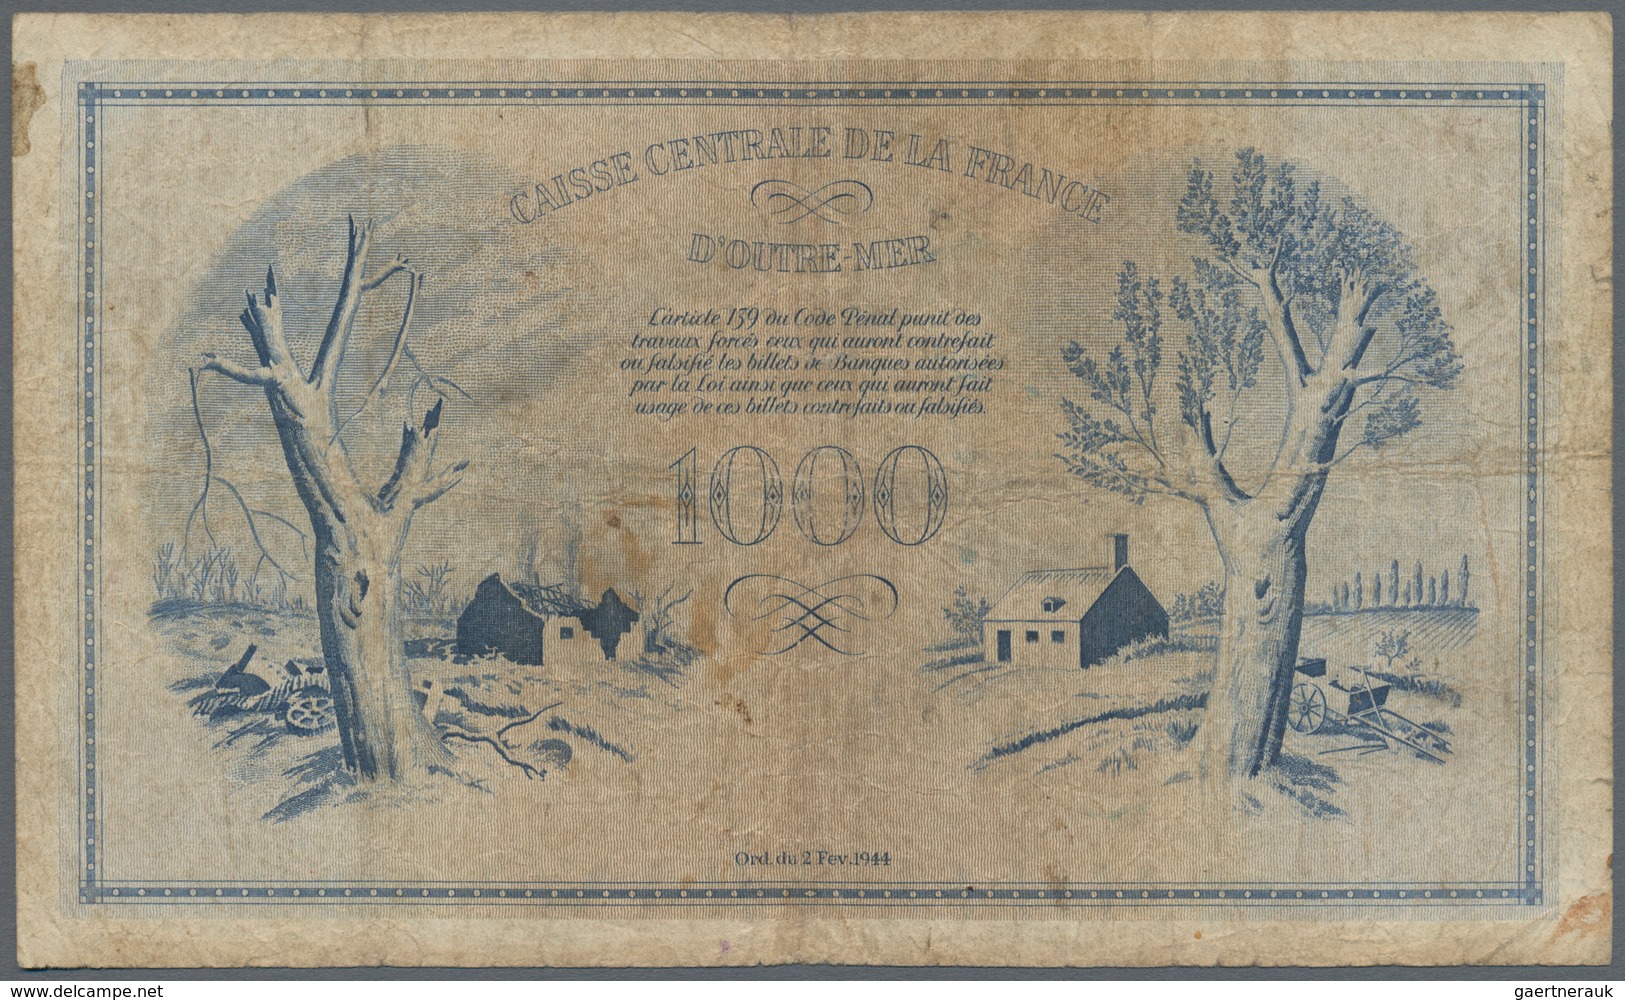 Guadeloupe: Caisse Centrale De La France D'Outre-Mer 1000 Francs 1944 With Watermark, P.30b, Extraor - Other - America